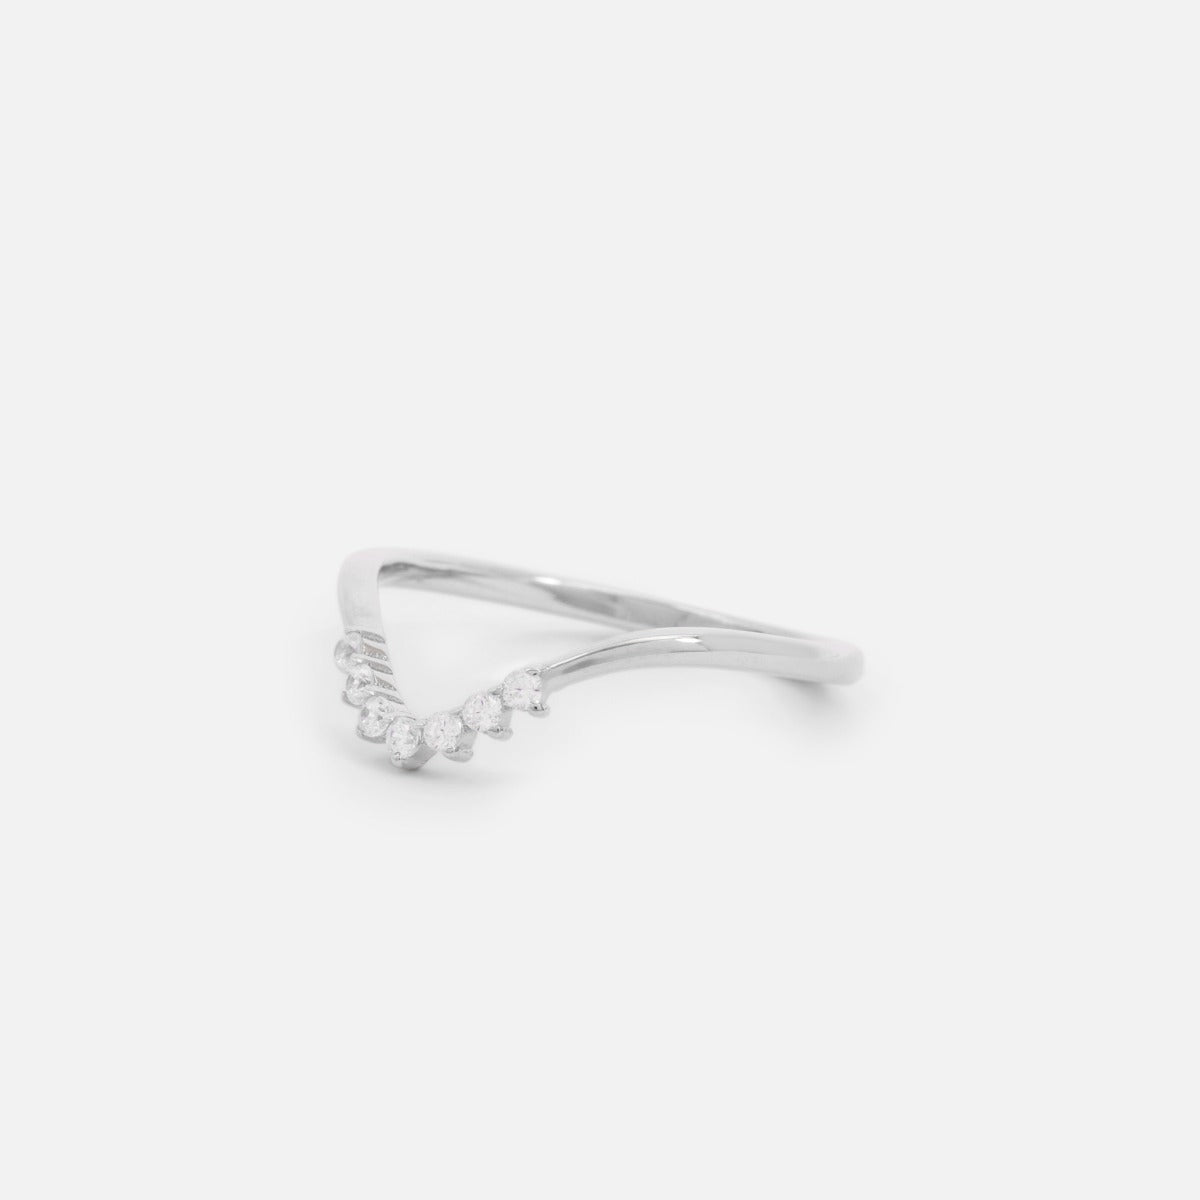 Sterling silver v shaped ring with cubic zirconia